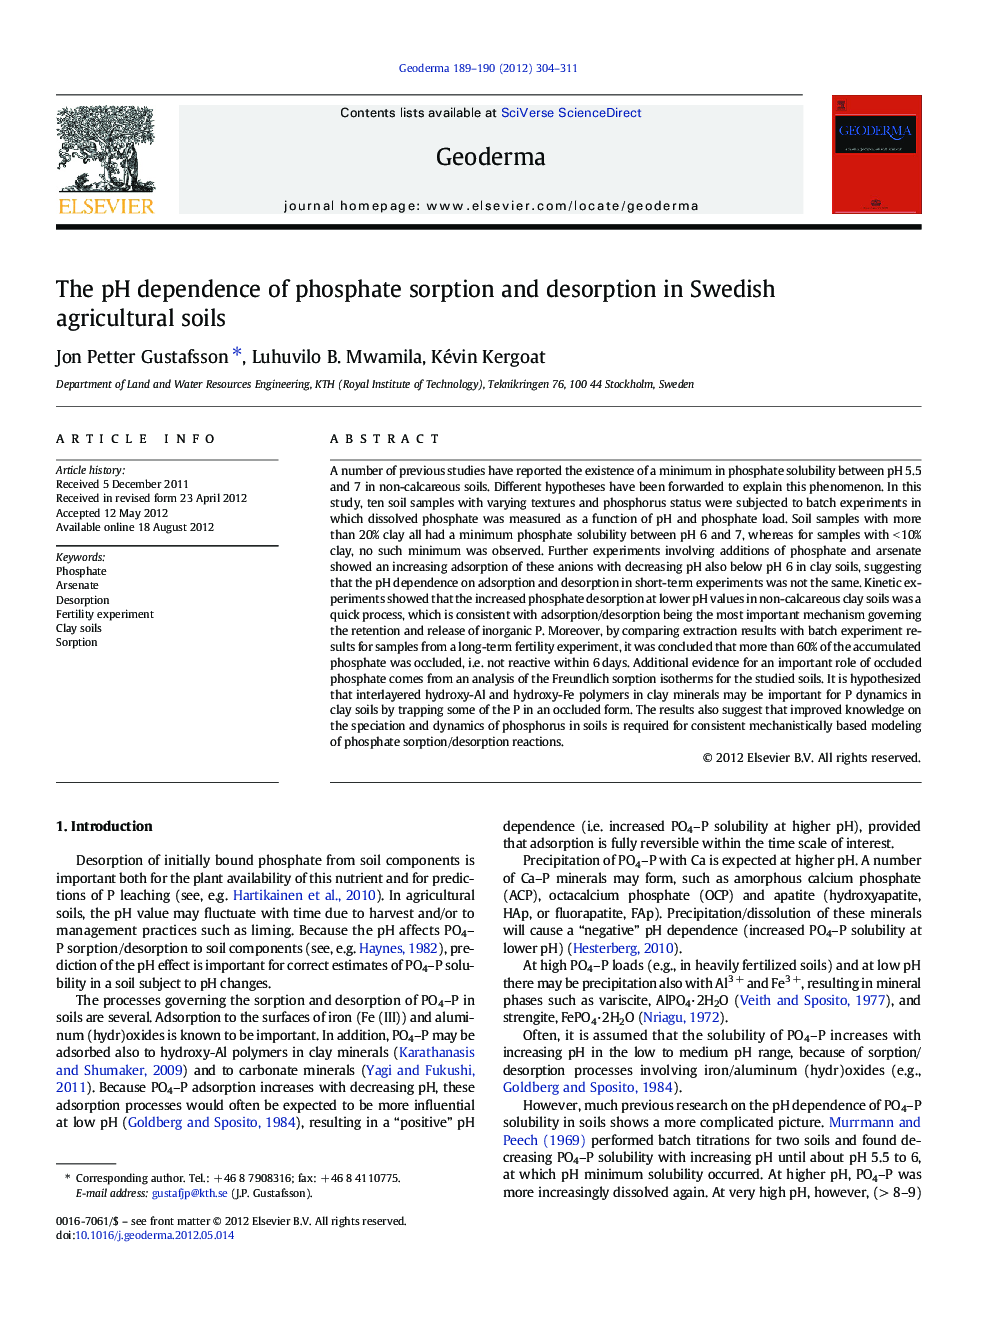 The pH dependence of phosphate sorption and desorption in Swedish agricultural soils